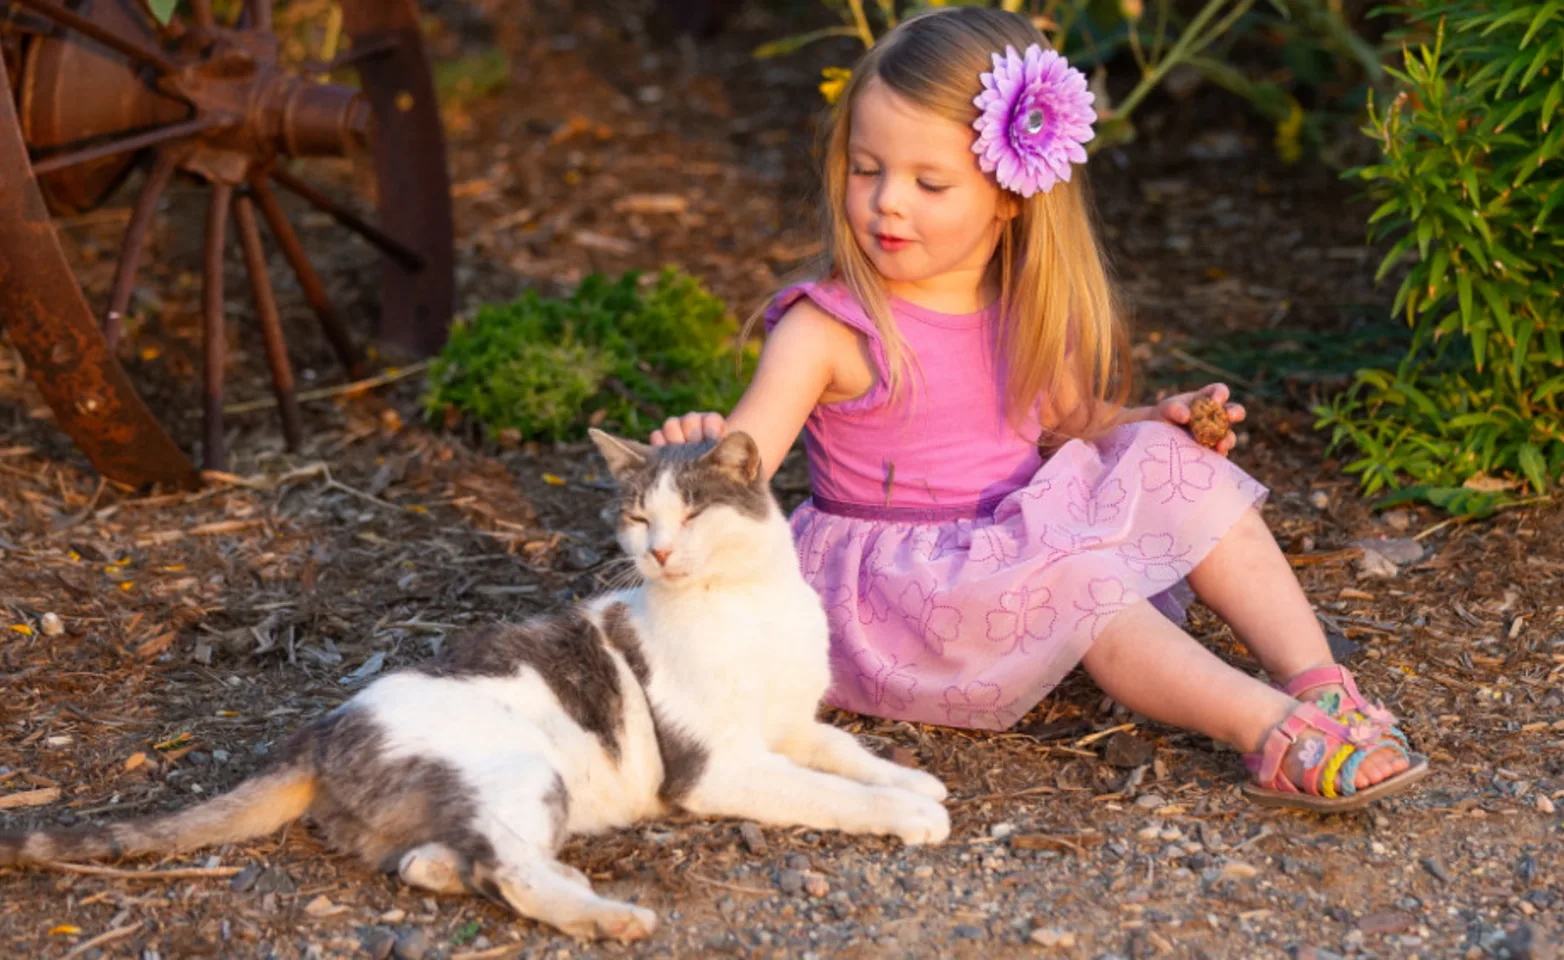 Gray & white cat laying next to a girl in a pink dress